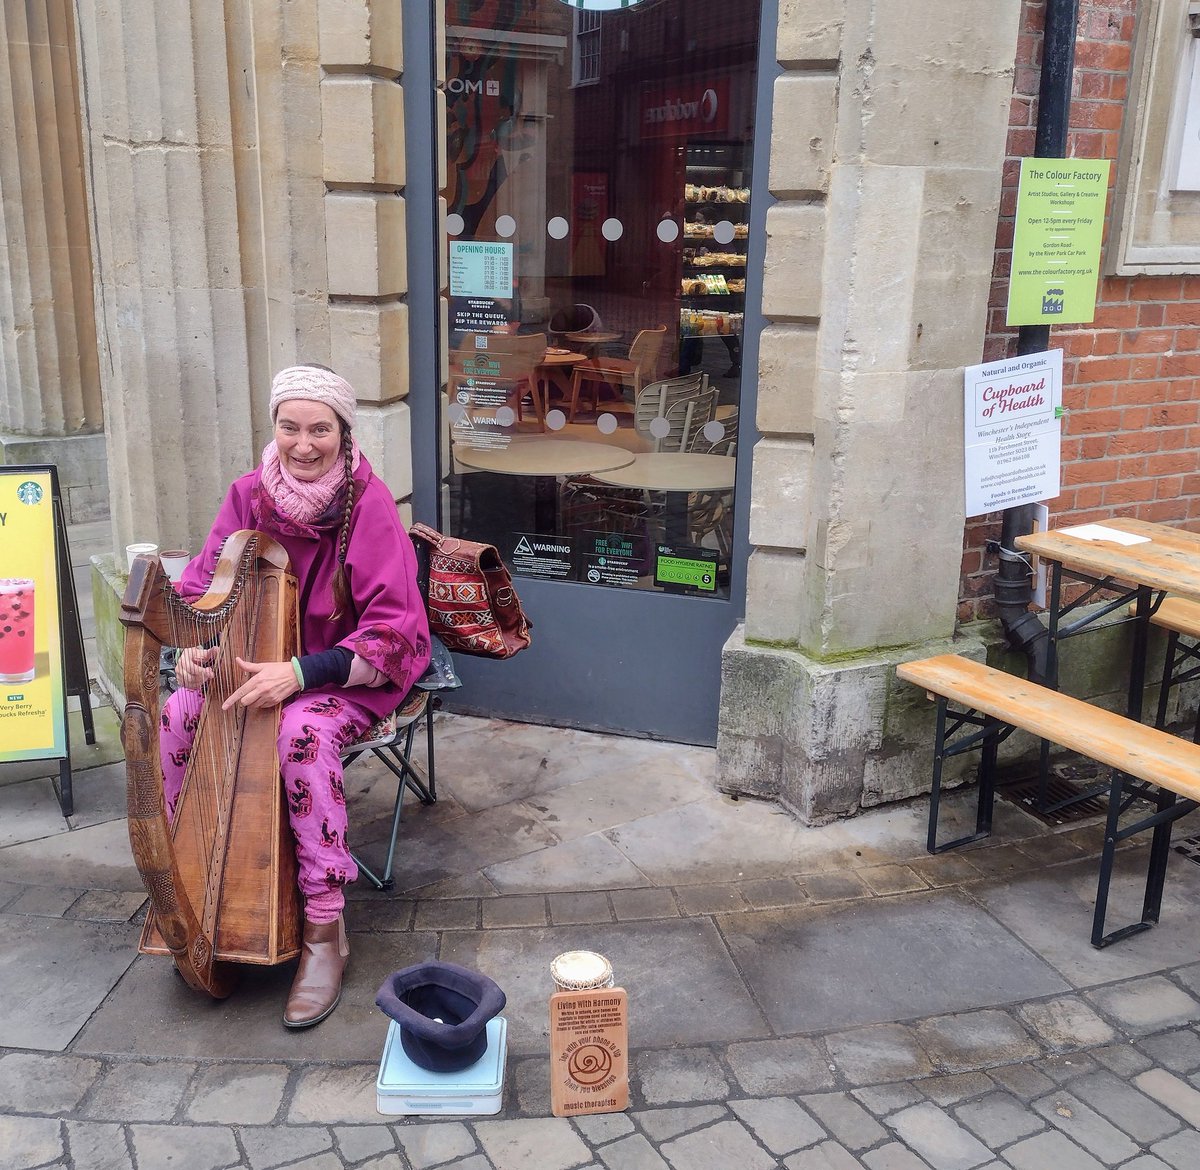 Hello Thursday 🎶🎩🙏 Out on the corner of Market Street today in wonderful Winchester. The market is on so come and say hello 👋✨🙏 #mhhsbd